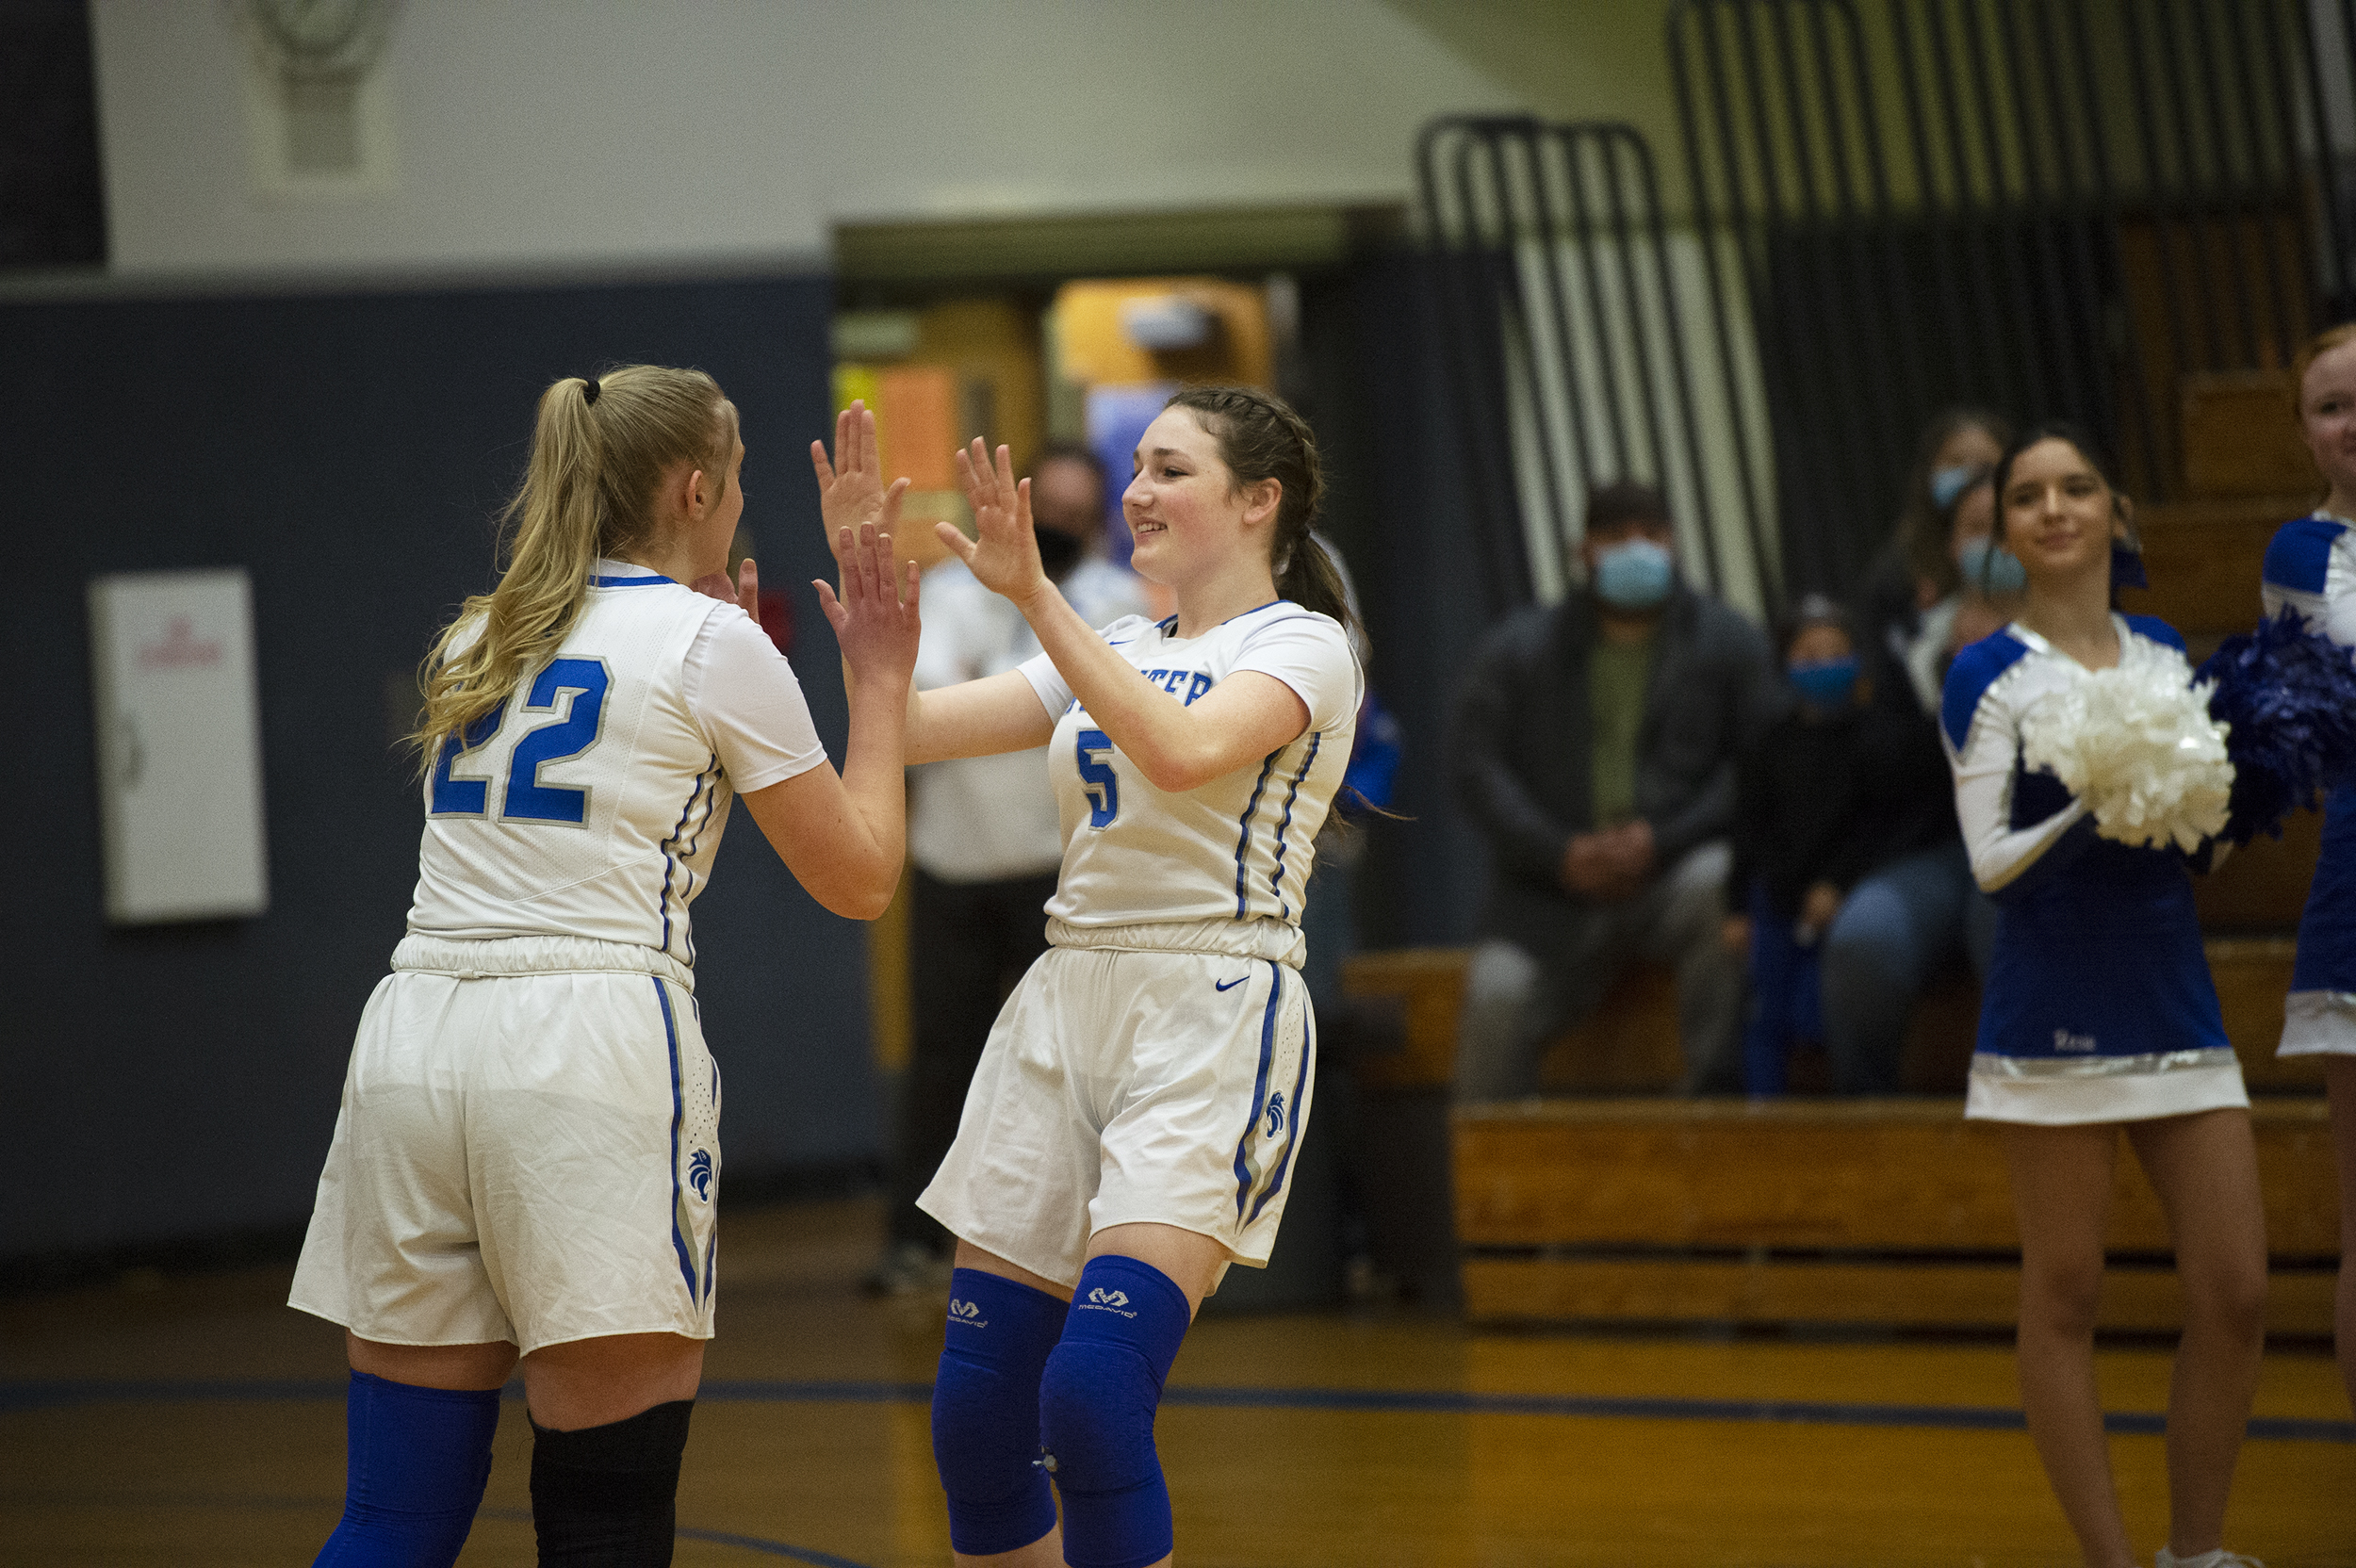 La Center’s Gianna D’Emilio (5) is greeted by Alyse Webberley (22) during pre-game introductions before the 1A district semifinal against Tenino at La Center High School on Tuesday.